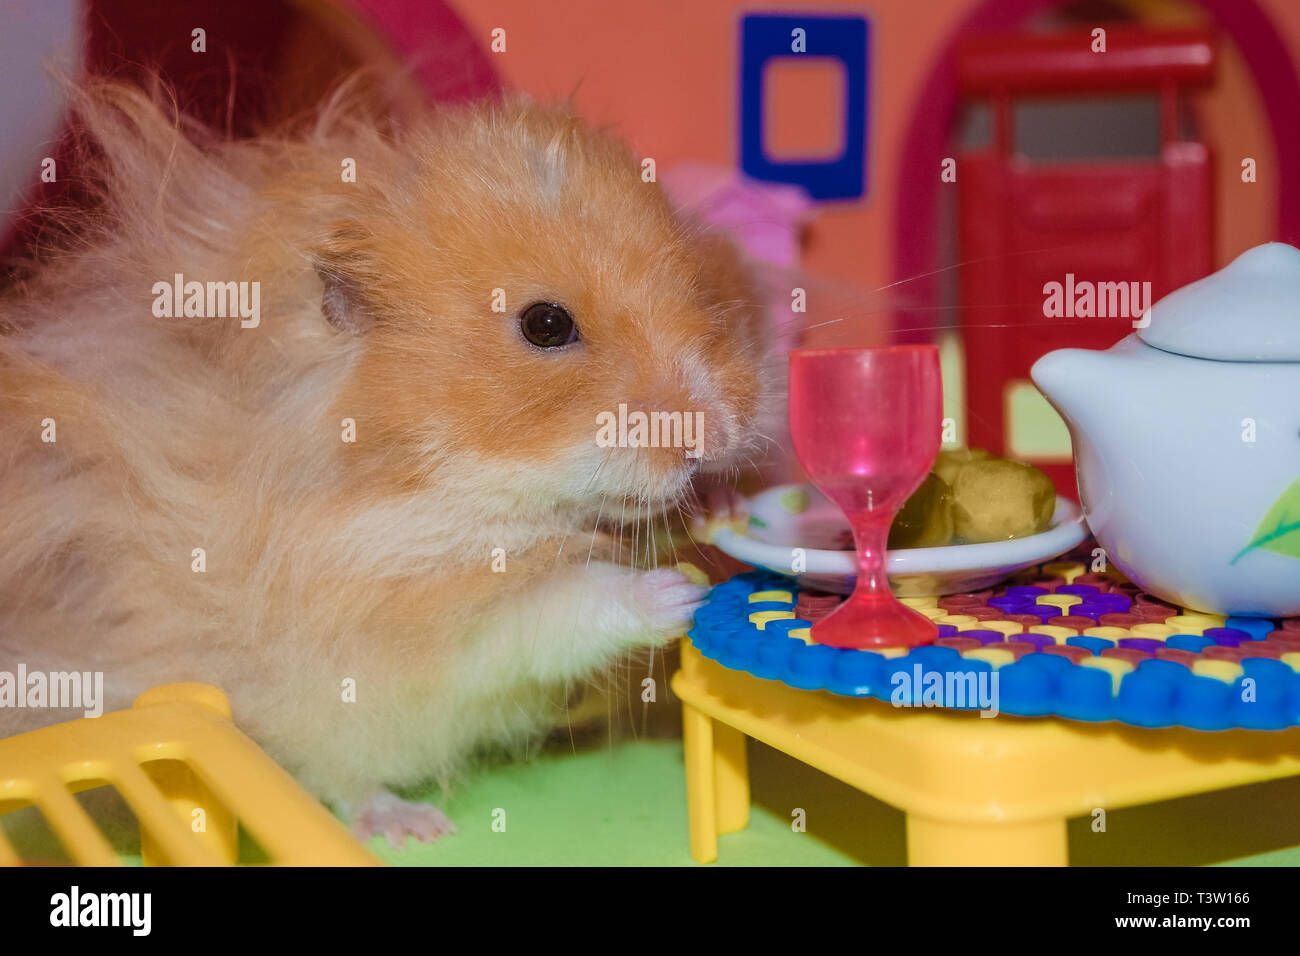 All About the Hamster: The Pouch-Cheeked Rodent - Gage Beasley Wildlife